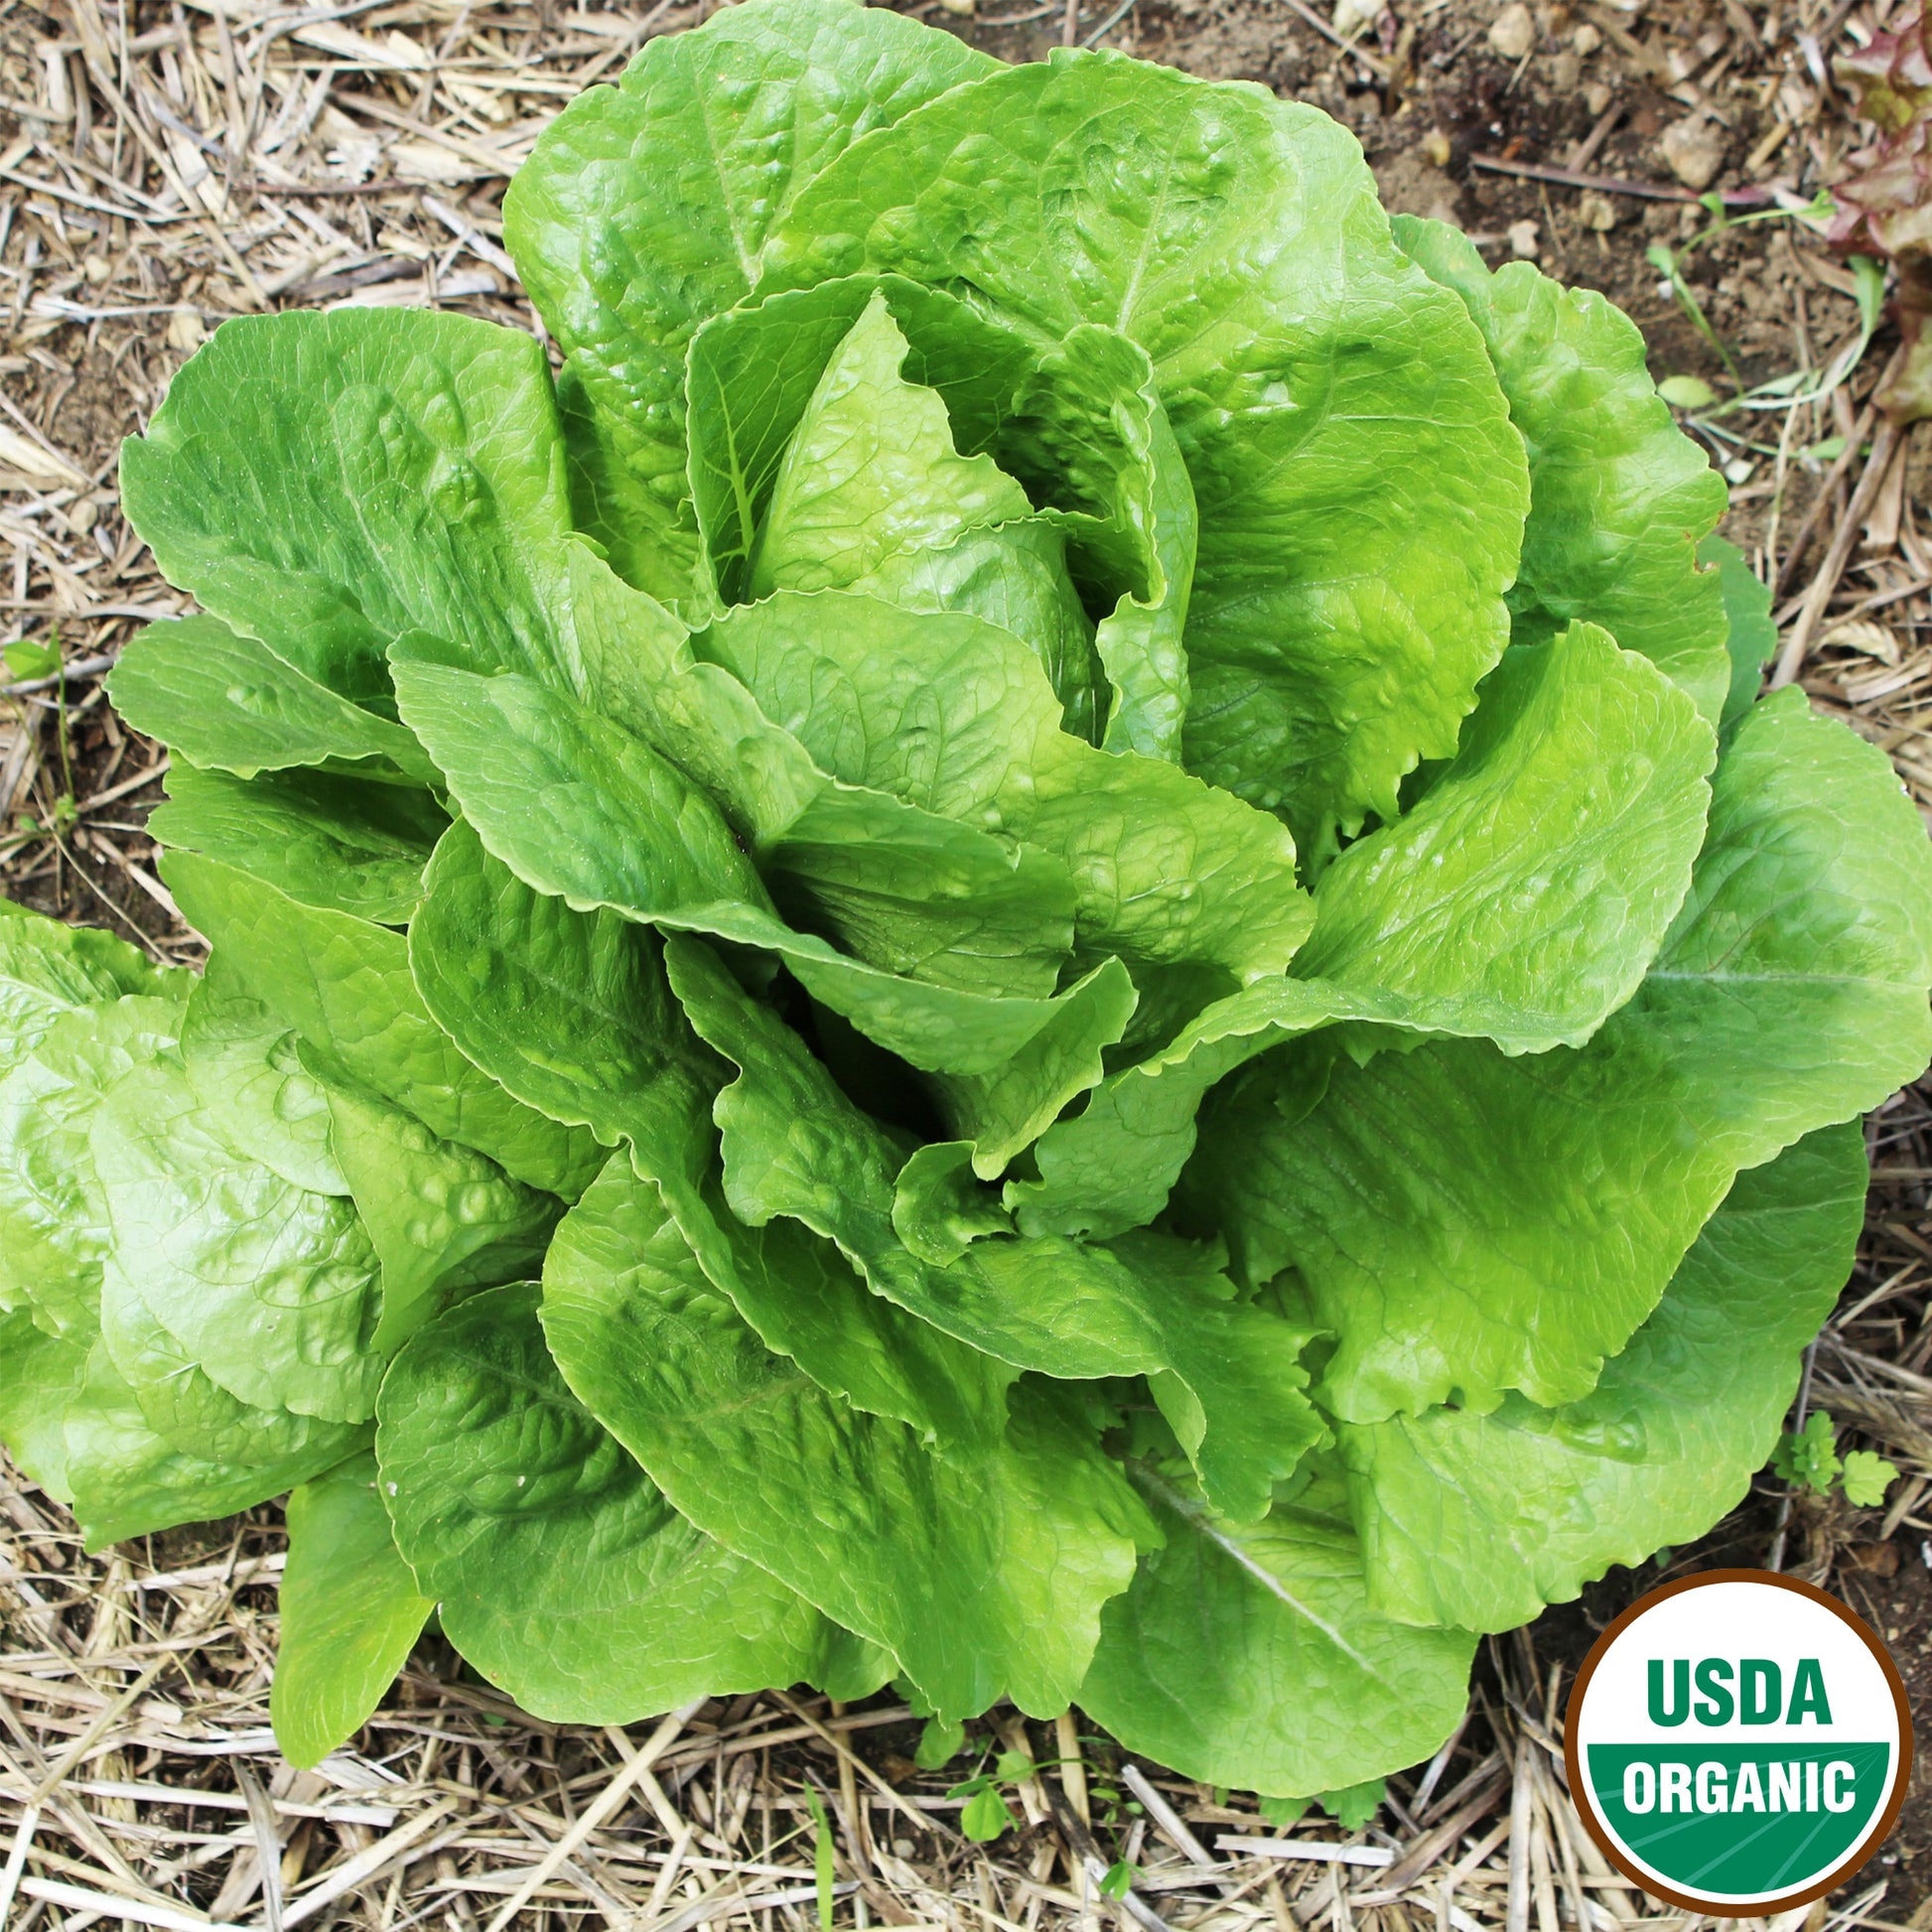 Organic Parris Island Cos Lettuce seeds fully matured and ready for harvesting. Picture shows head of beautiful green lettuce leaves.